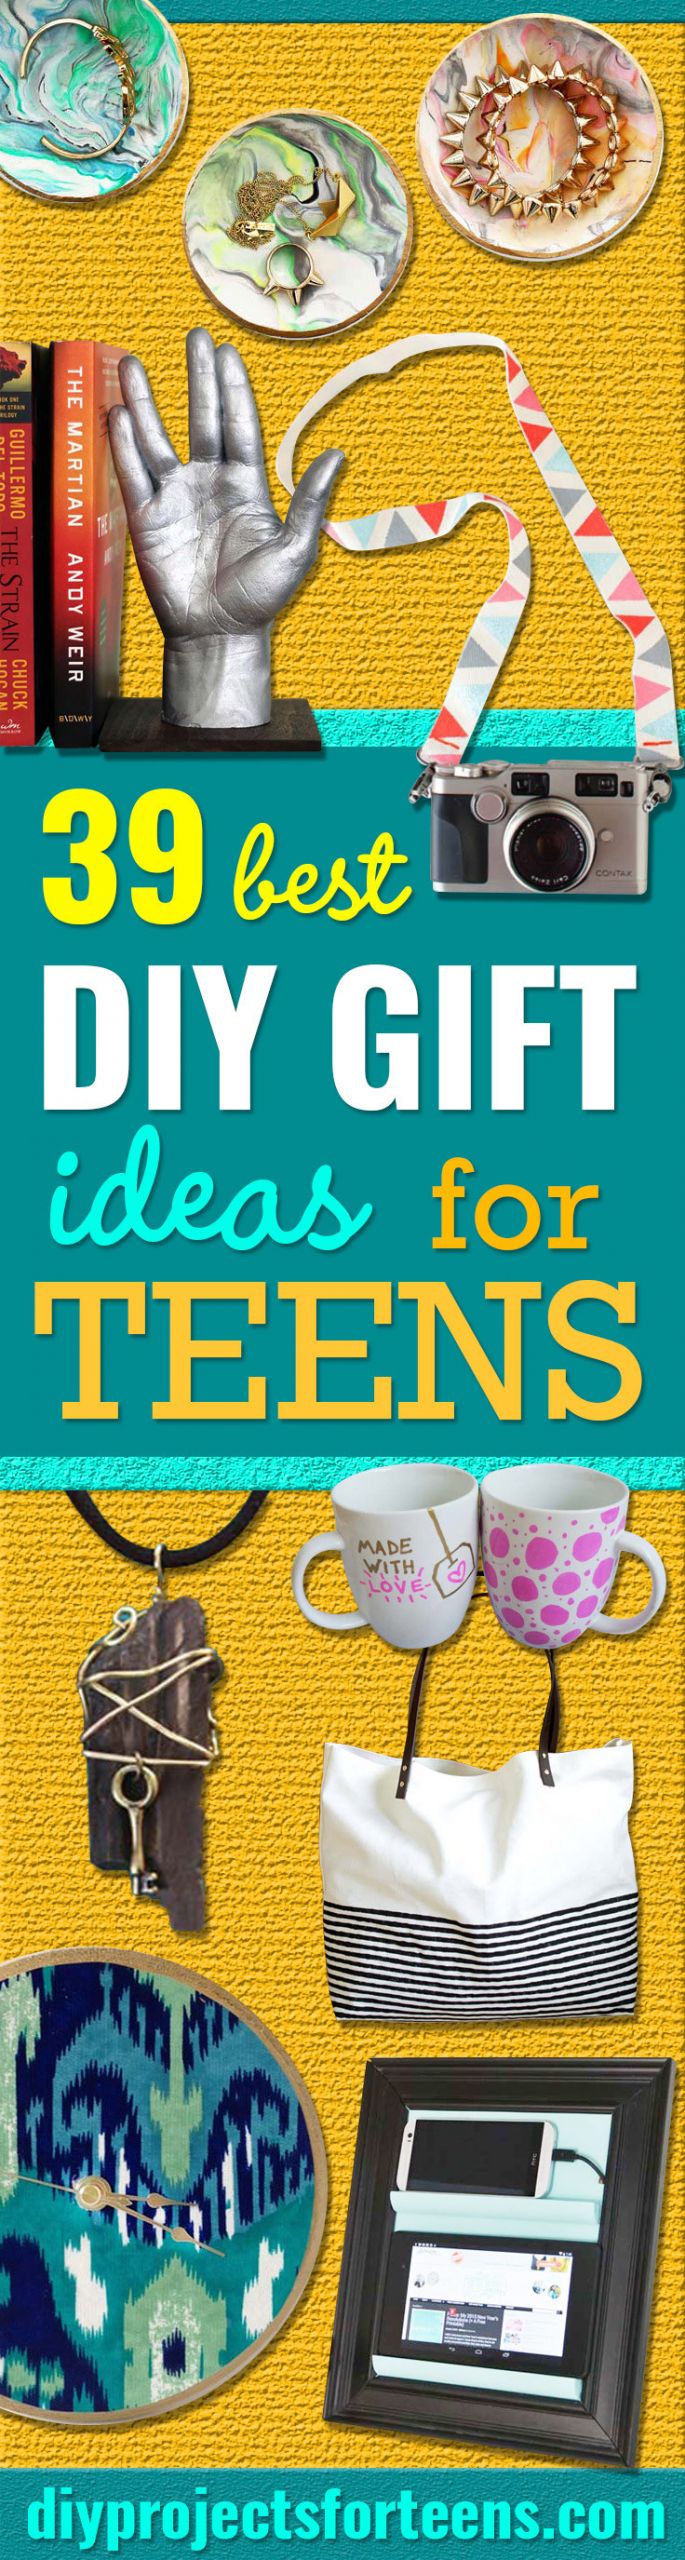 DIY Christmas Gifts For Teenagers
 39 Best DIY Gift Ideas For Teens